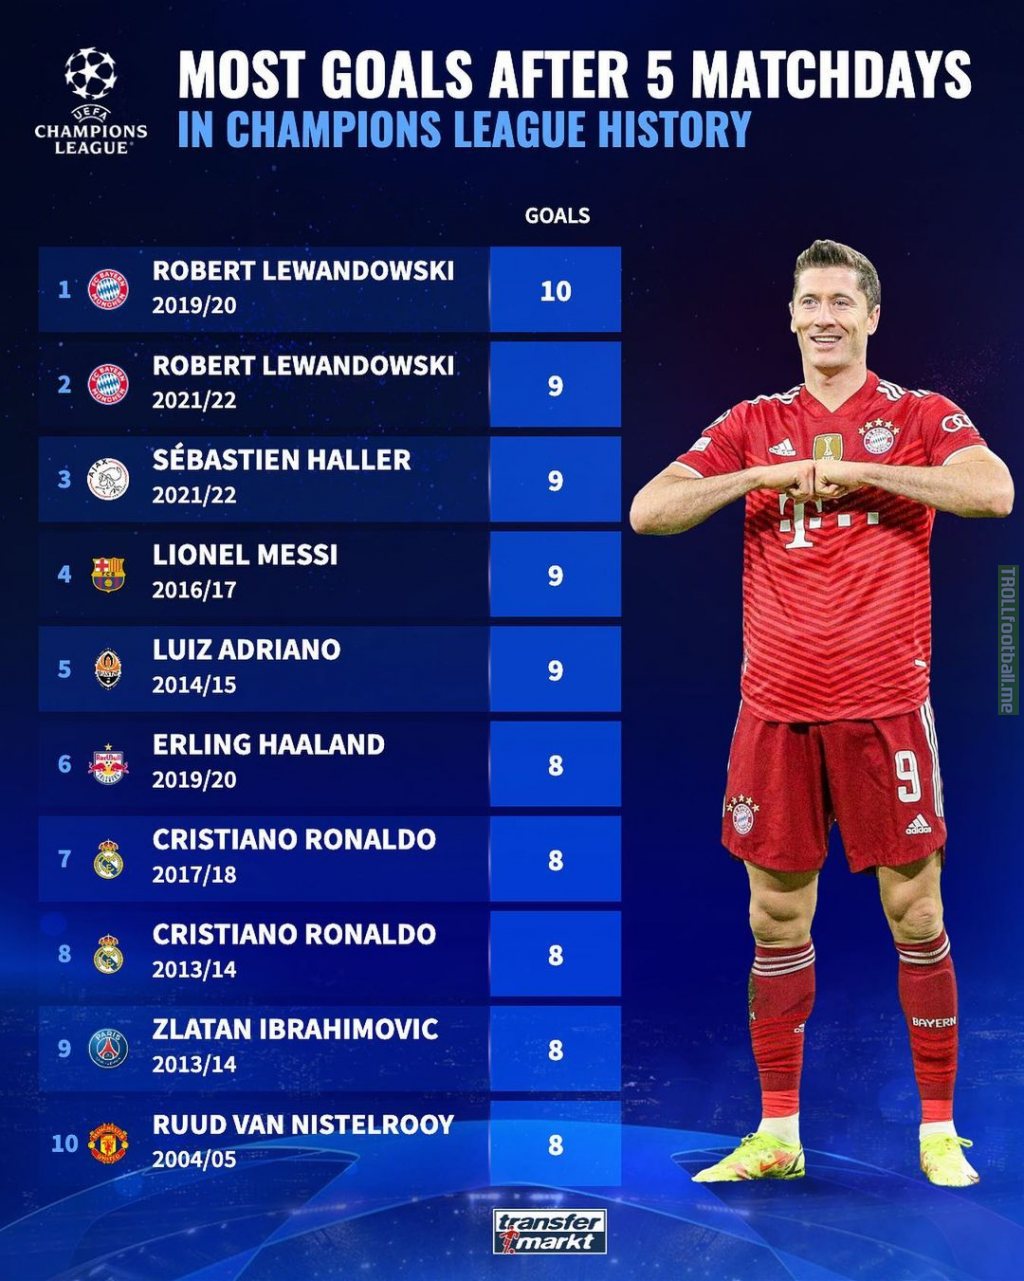 Most goals after 5 matchdays in Champions League history